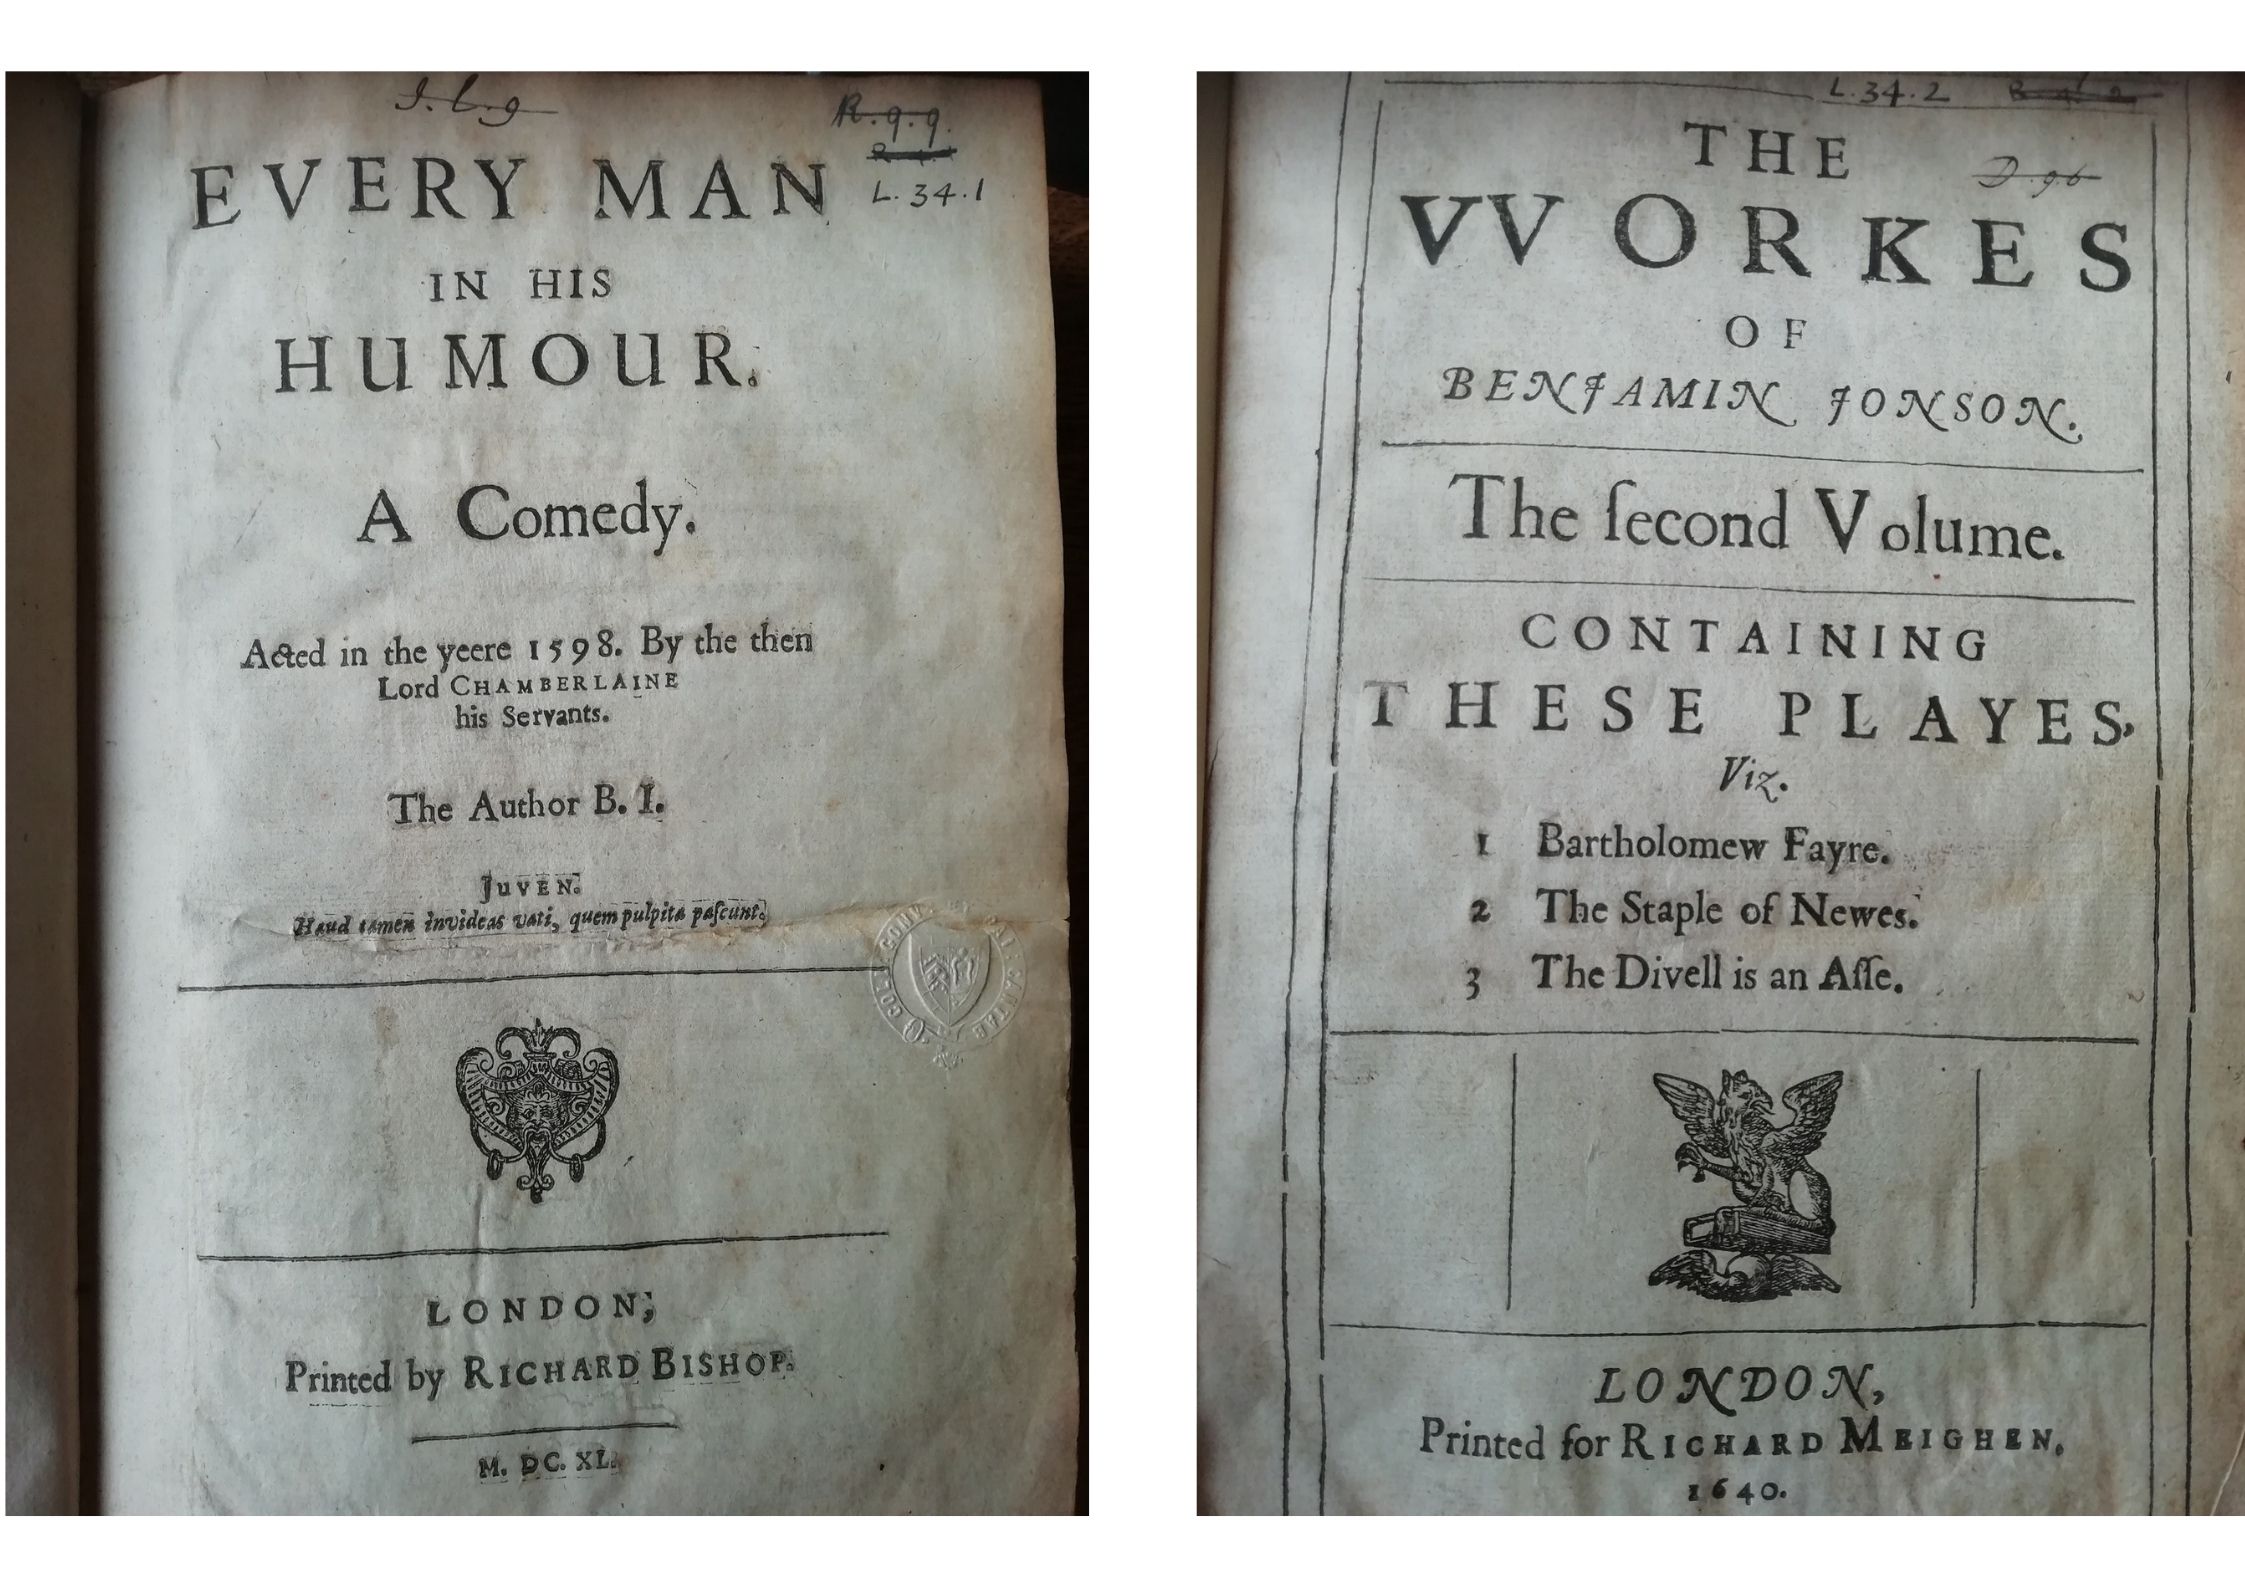 Every Man in his Humour and The Workes title pages